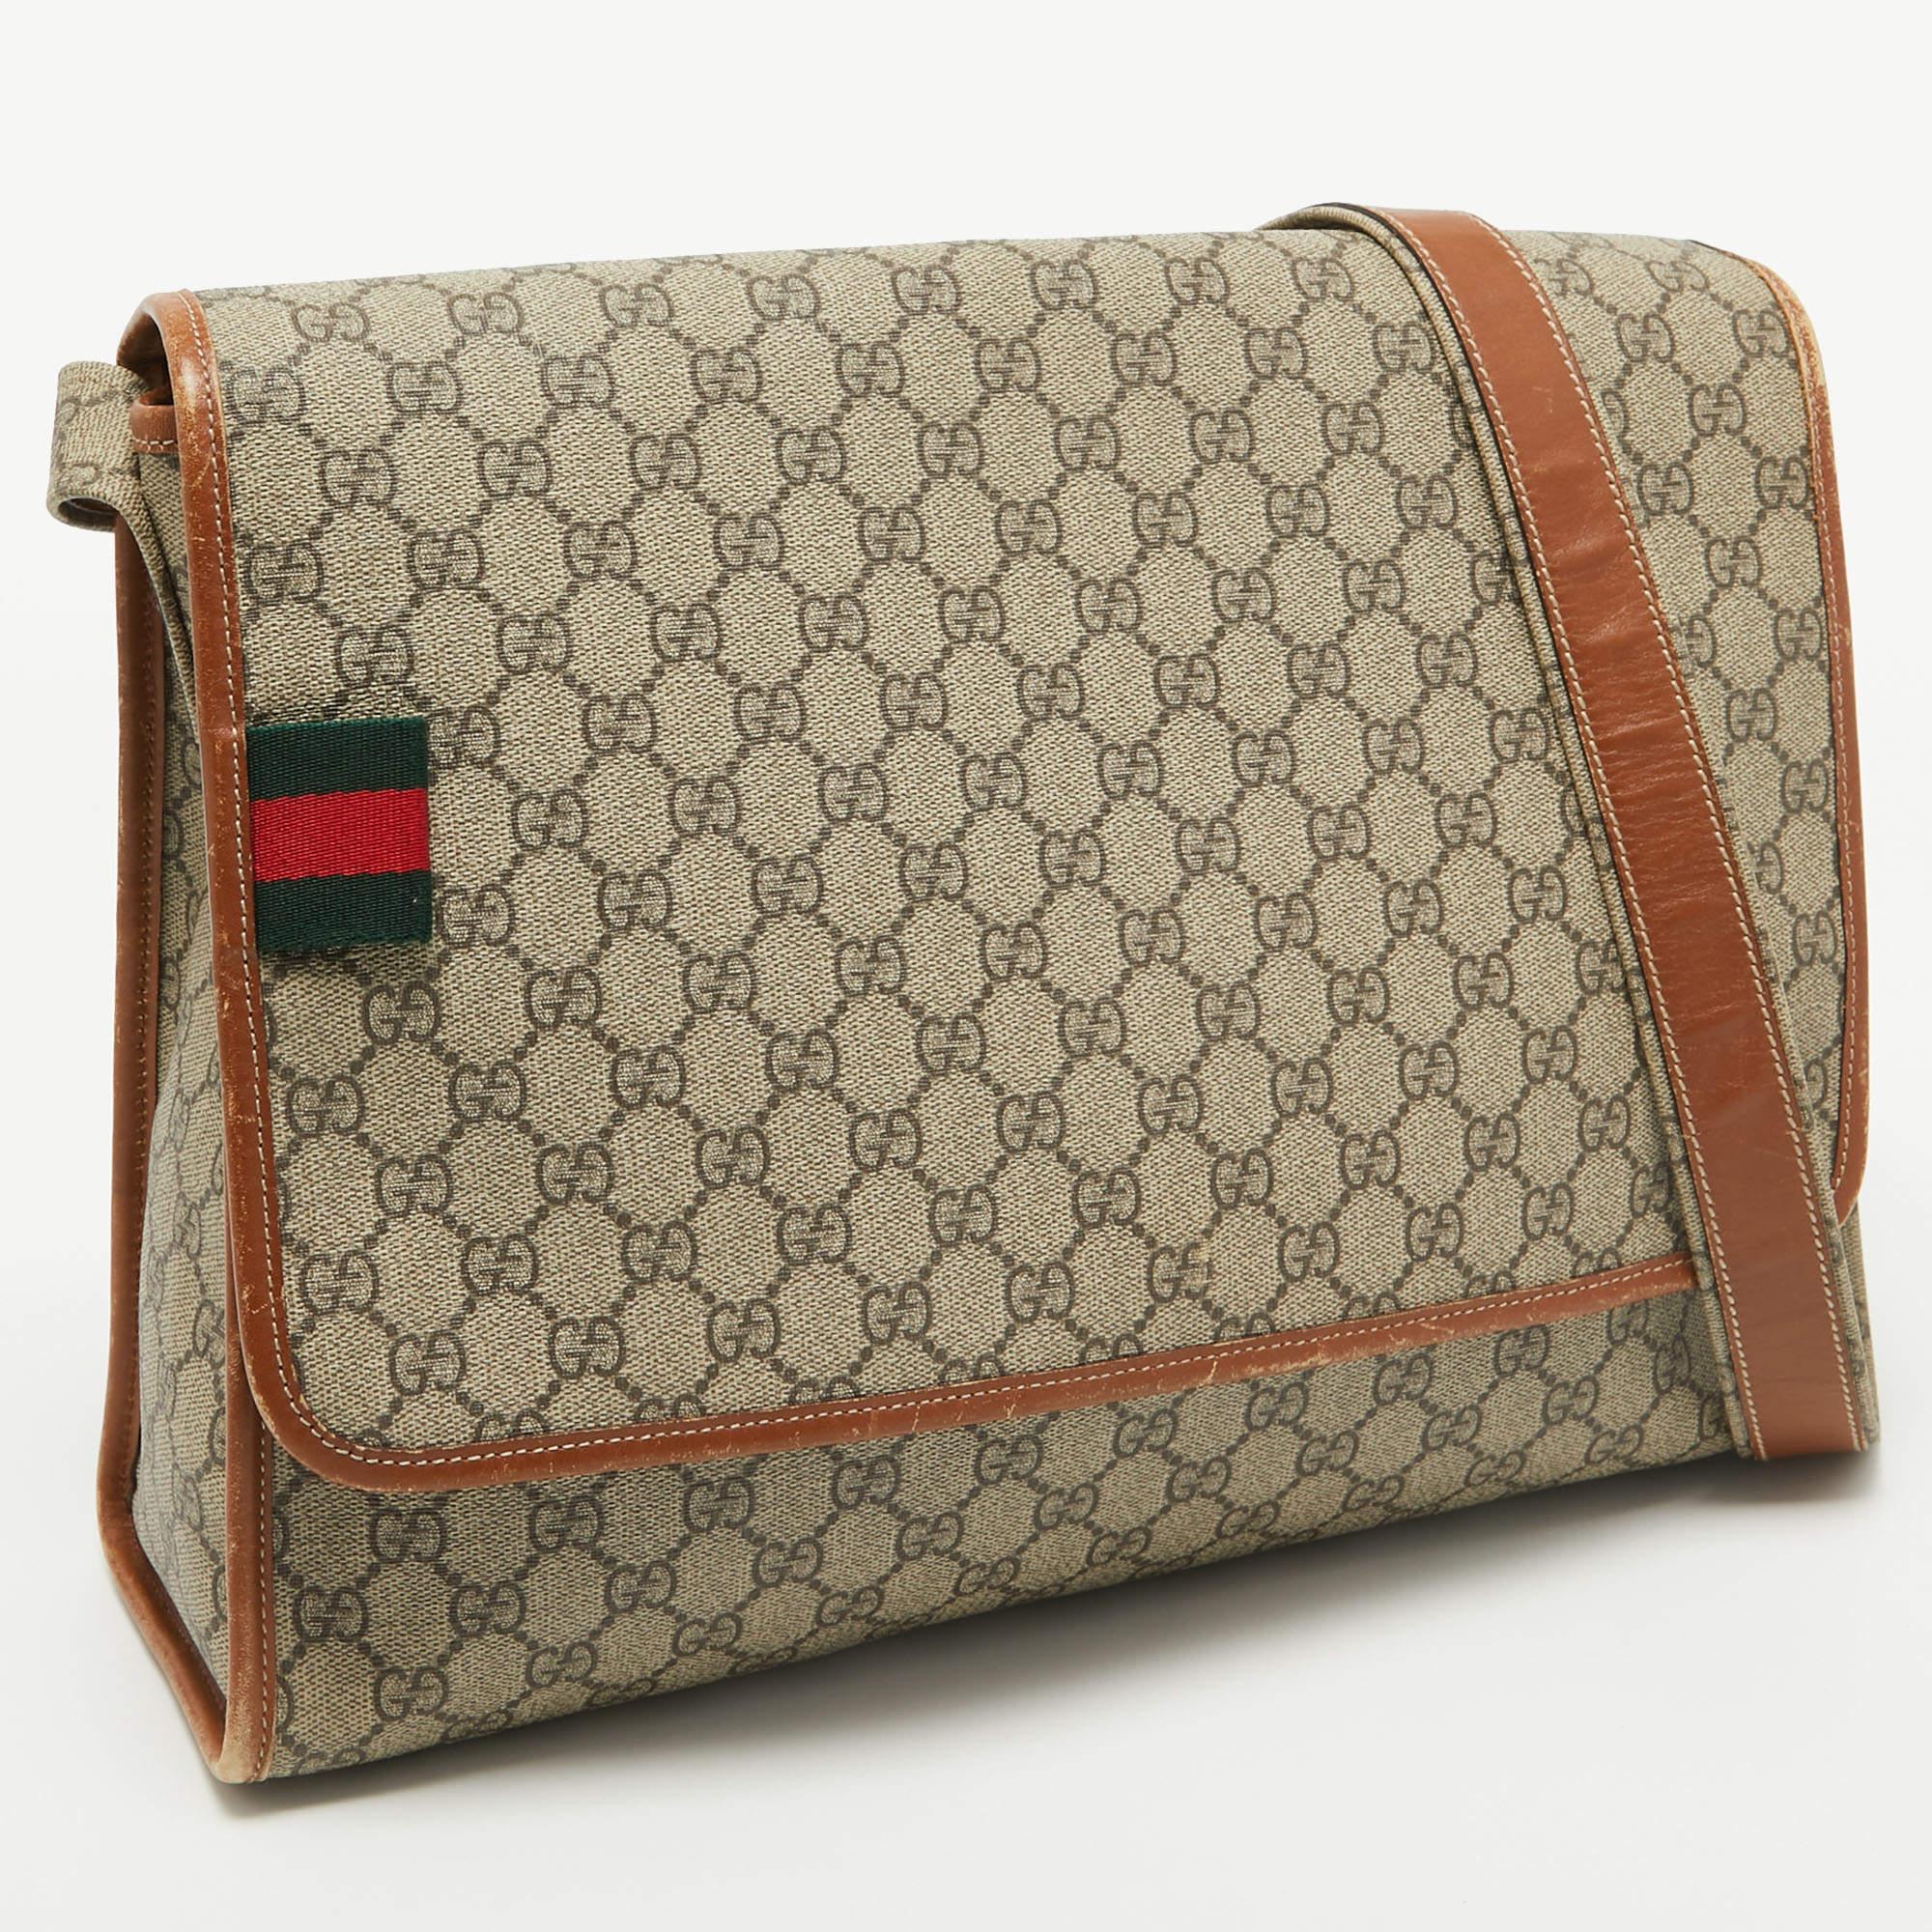 Gucci Beige/Brown GG Supreme Canvas And Leather Messenger Bag 26